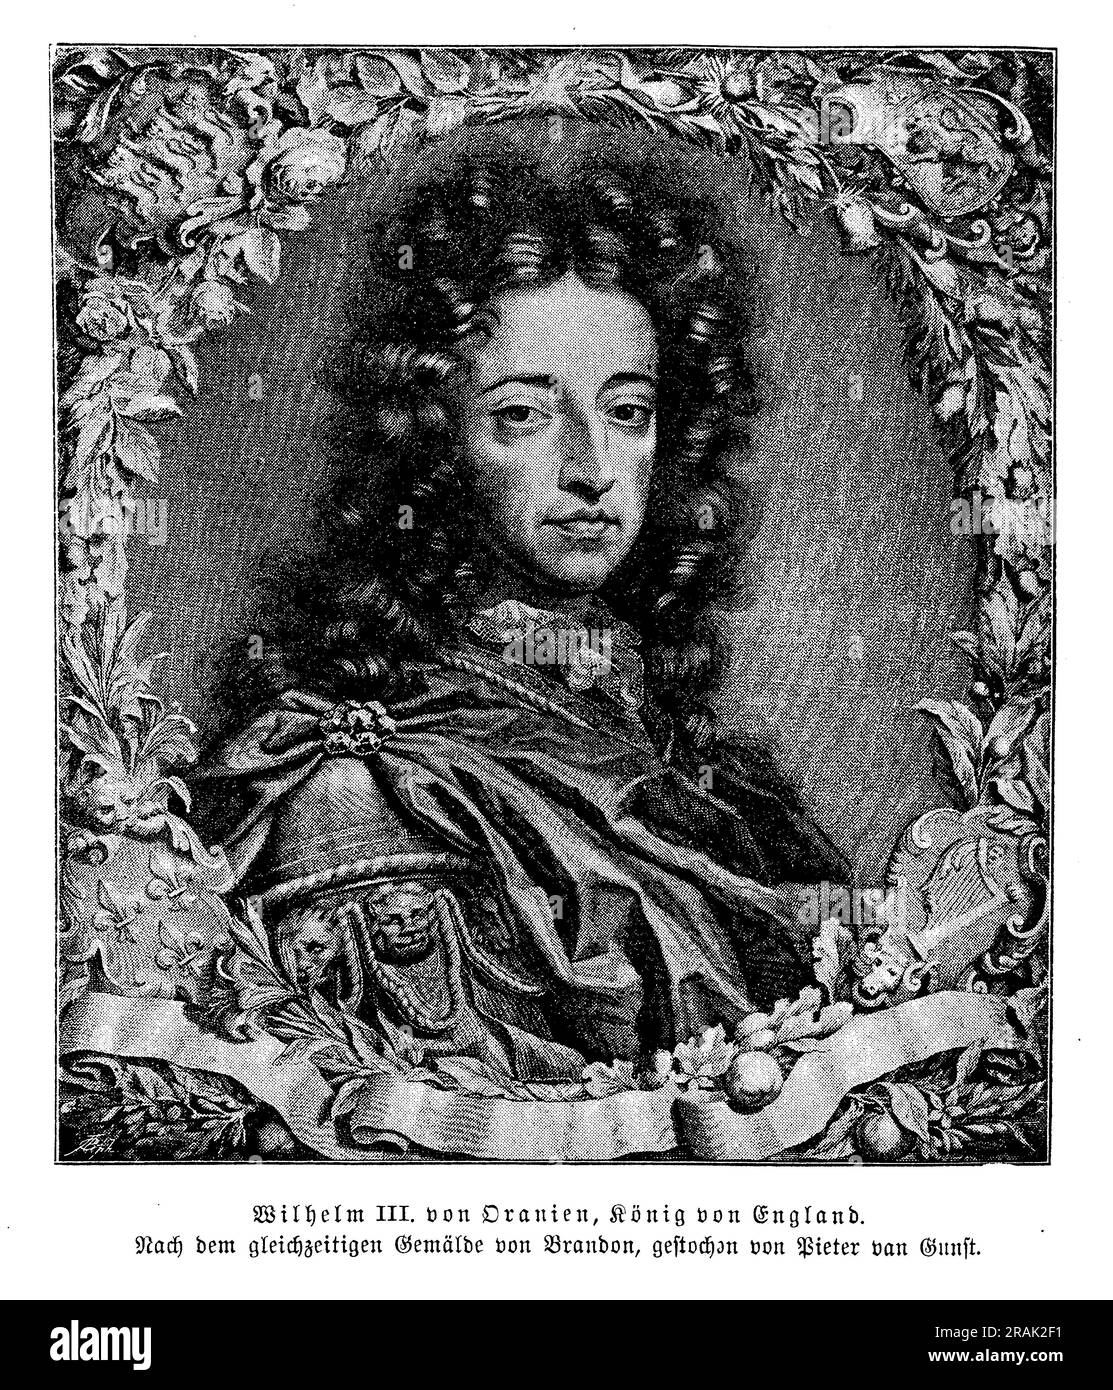 William III of Orange, also known as William of Orange-Nassau, was a Dutch prince who ruled as King of England, Scotland, and Ireland from 1689 until his death in 1702. He became king as part of the Glorious Revolution, which saw the overthrow of his father-in-law, James II, and the establishment of a constitutional monarchy in England. William is remembered for his military prowess, his commitment to Protestantism, and his efforts to unite Europe against the expansionist ambitions of Louis XIV of France. Stock Photo